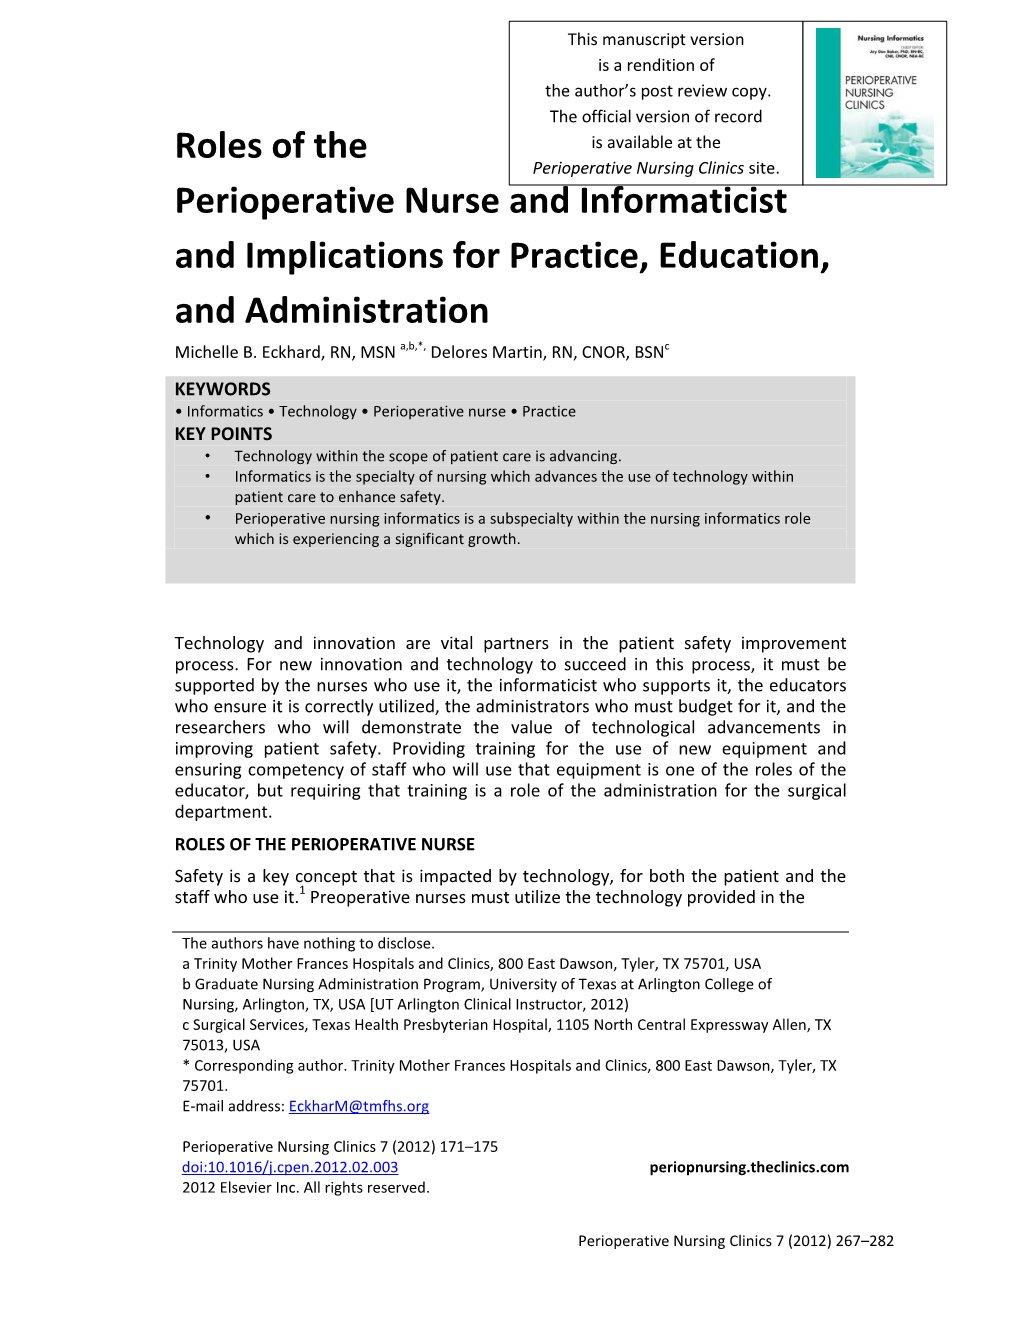 Roles of the Perioperative Nurse and Informaticist and Implications For